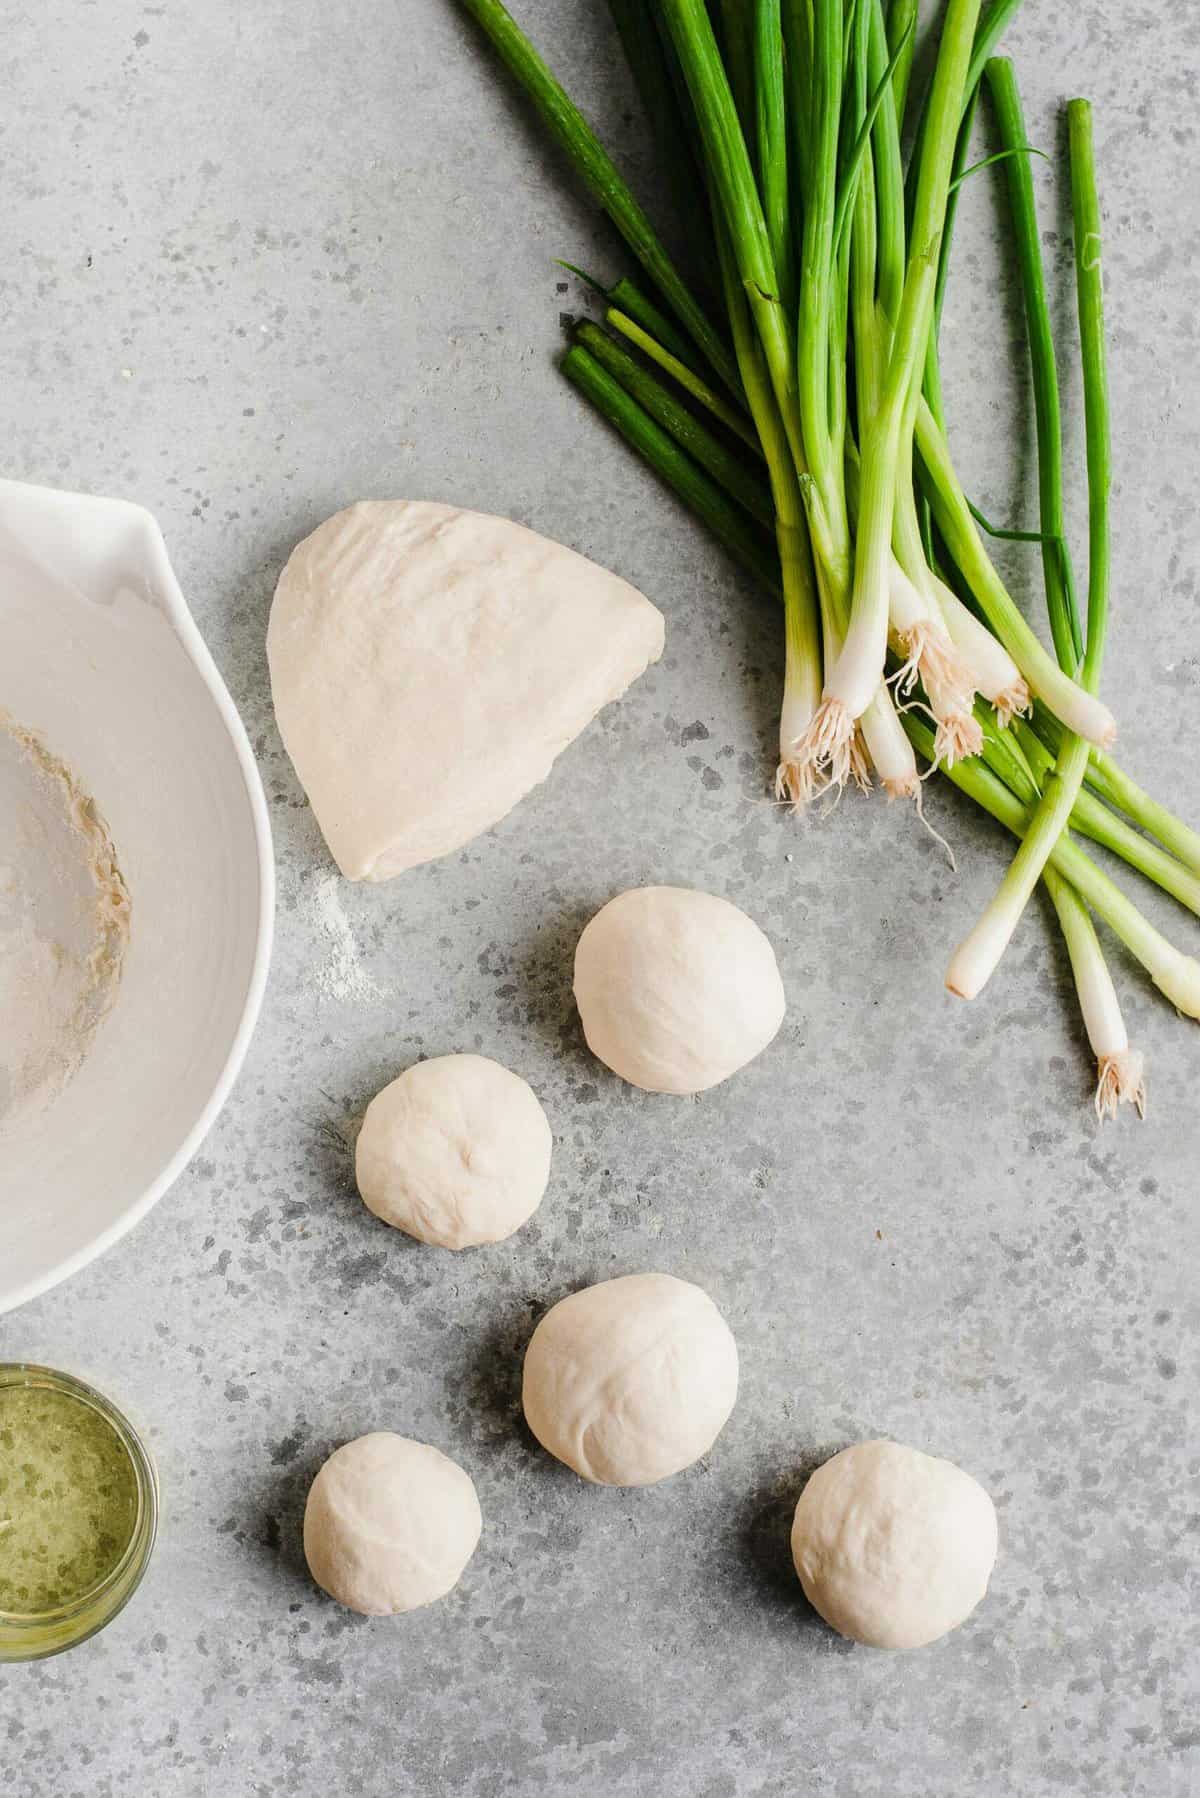 Balls of scallion pancake dough with bunches of scallions and oil